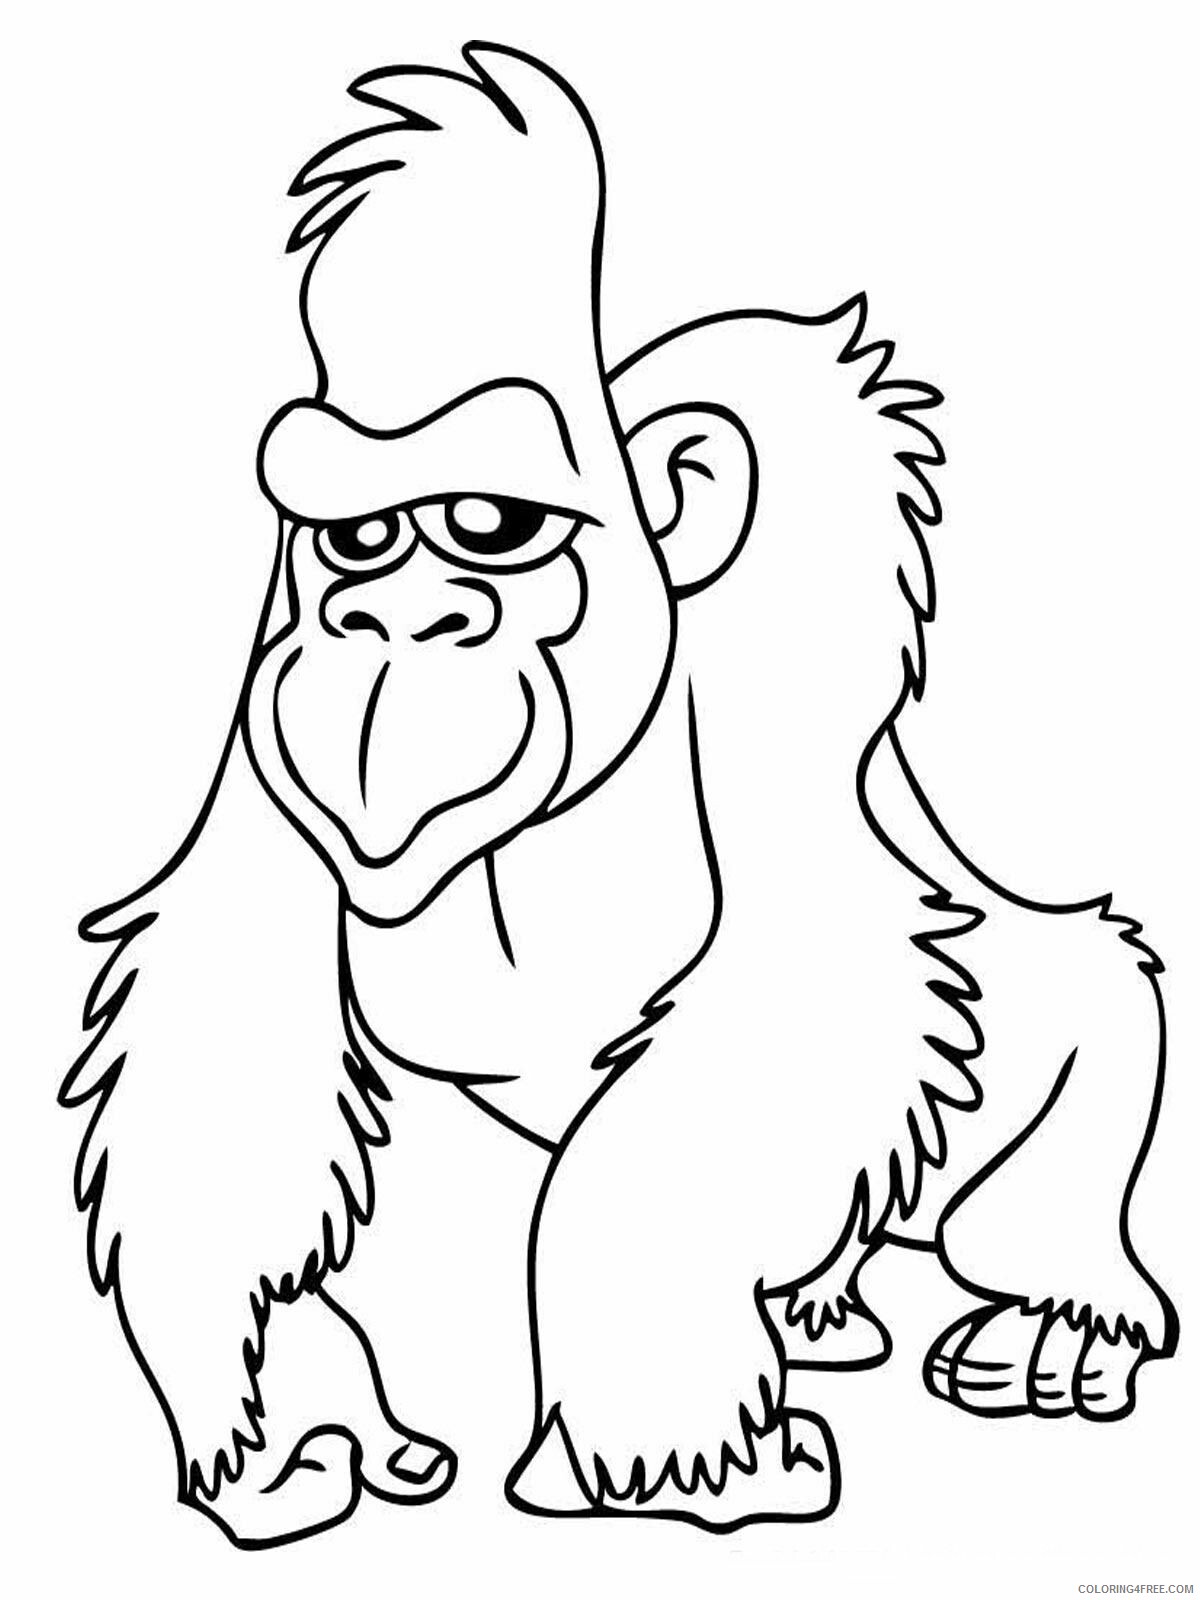 Ape Coloring Page Gorilla Printable Sheets Ape Head Coloring 2021 a 1732 Coloring4free